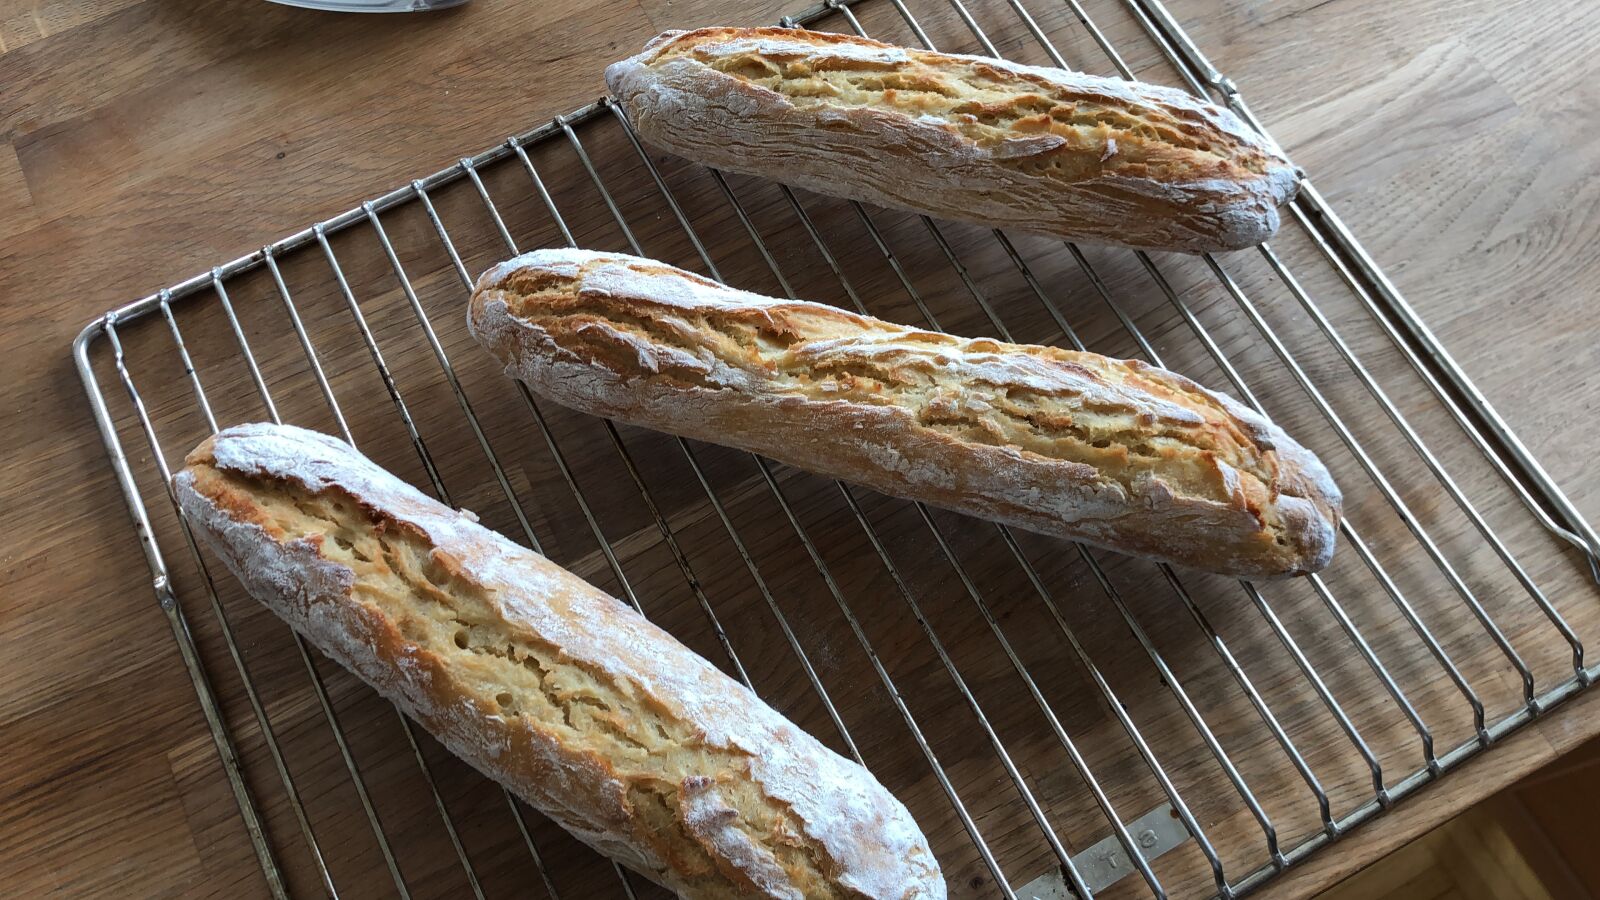 Apple iPhone X sample photo. Baguette, bake, baked goods photography